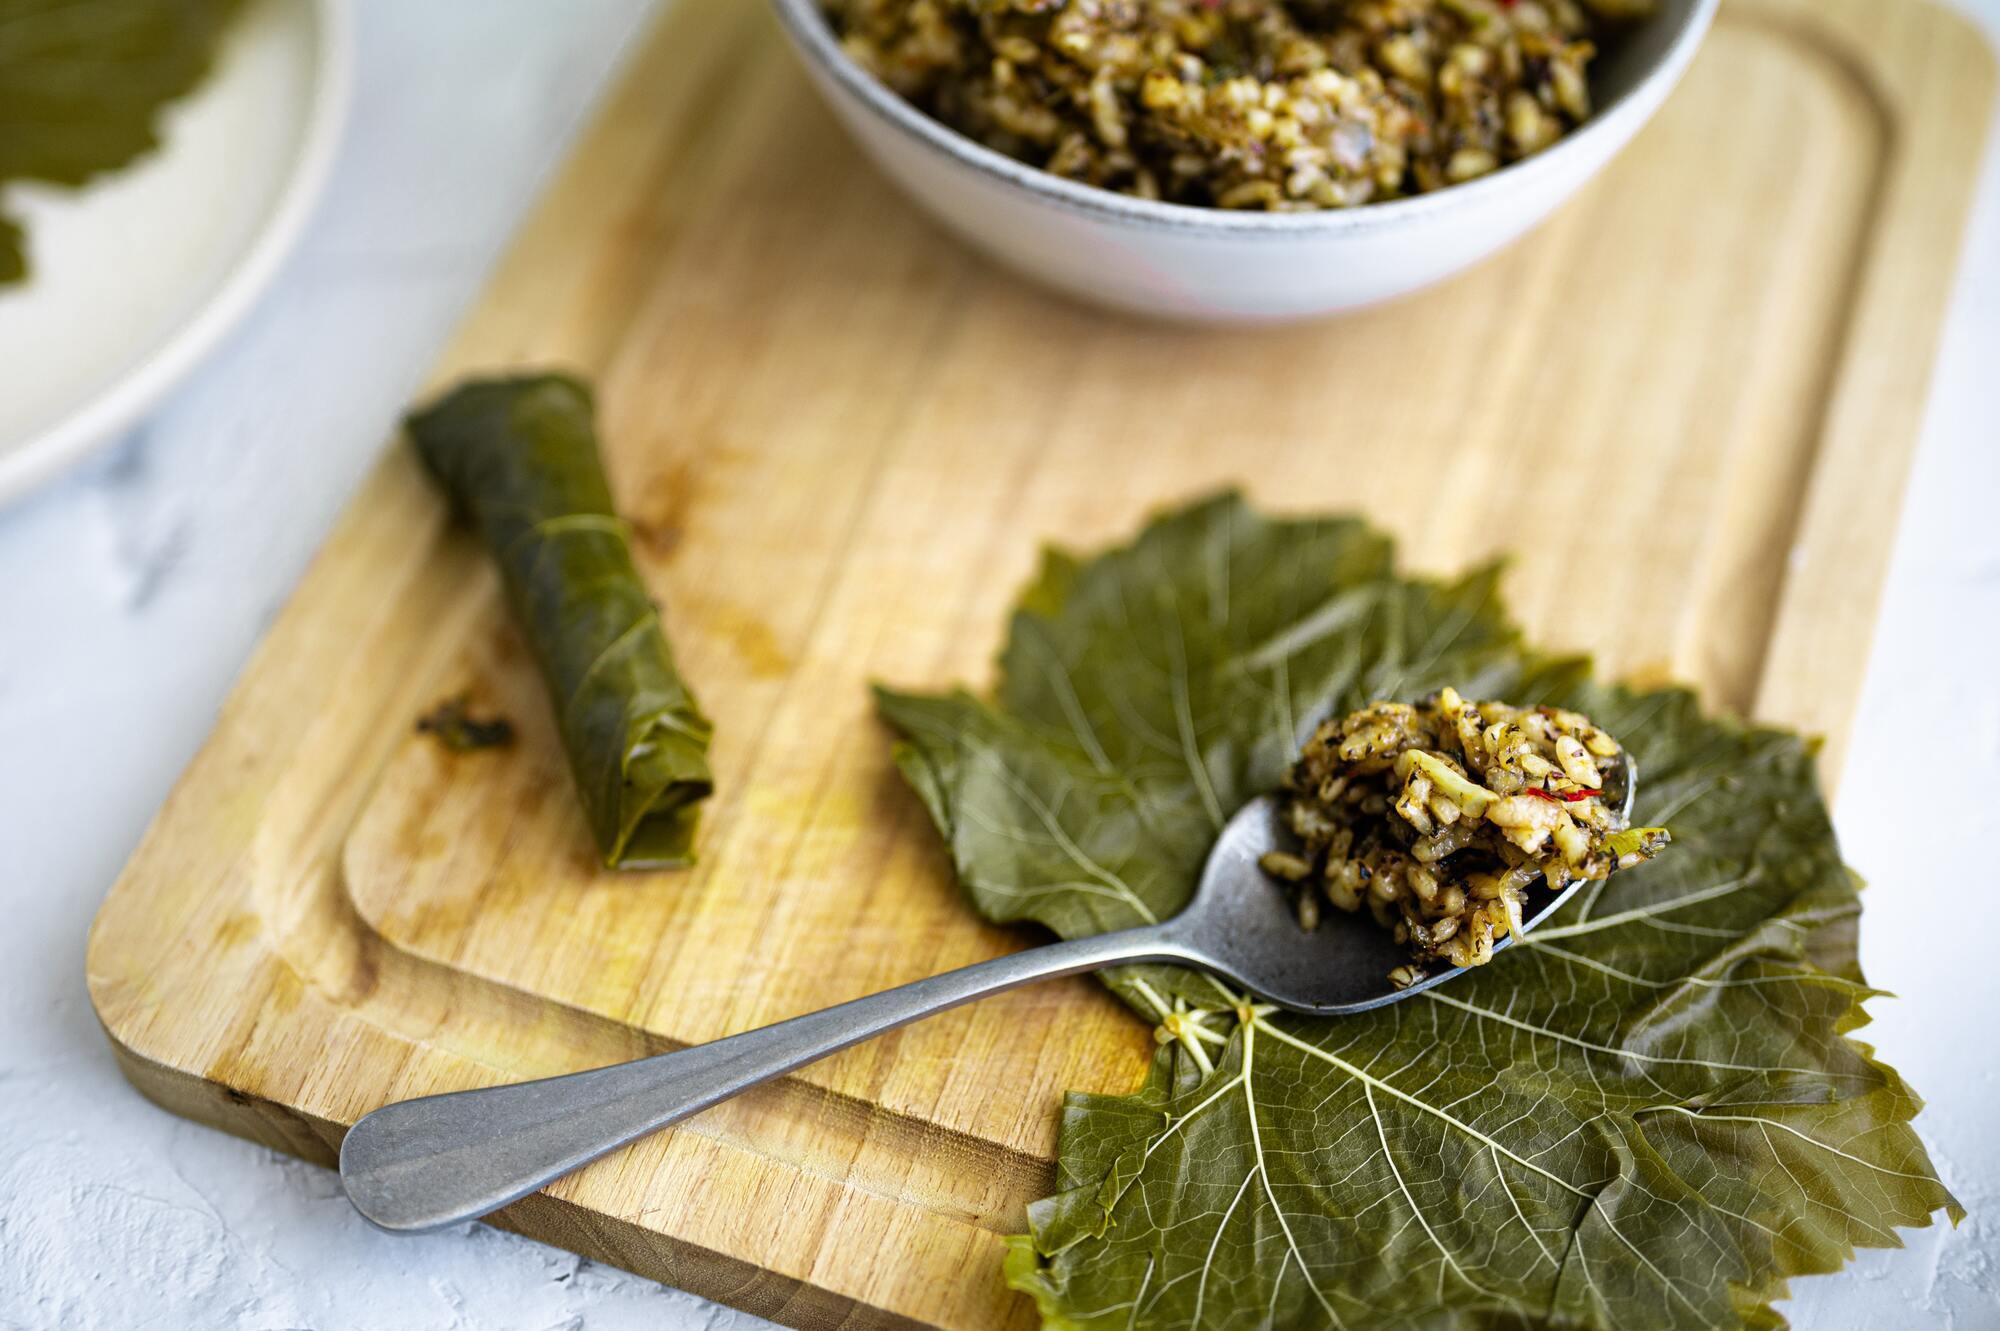 How to cook dolma correctly